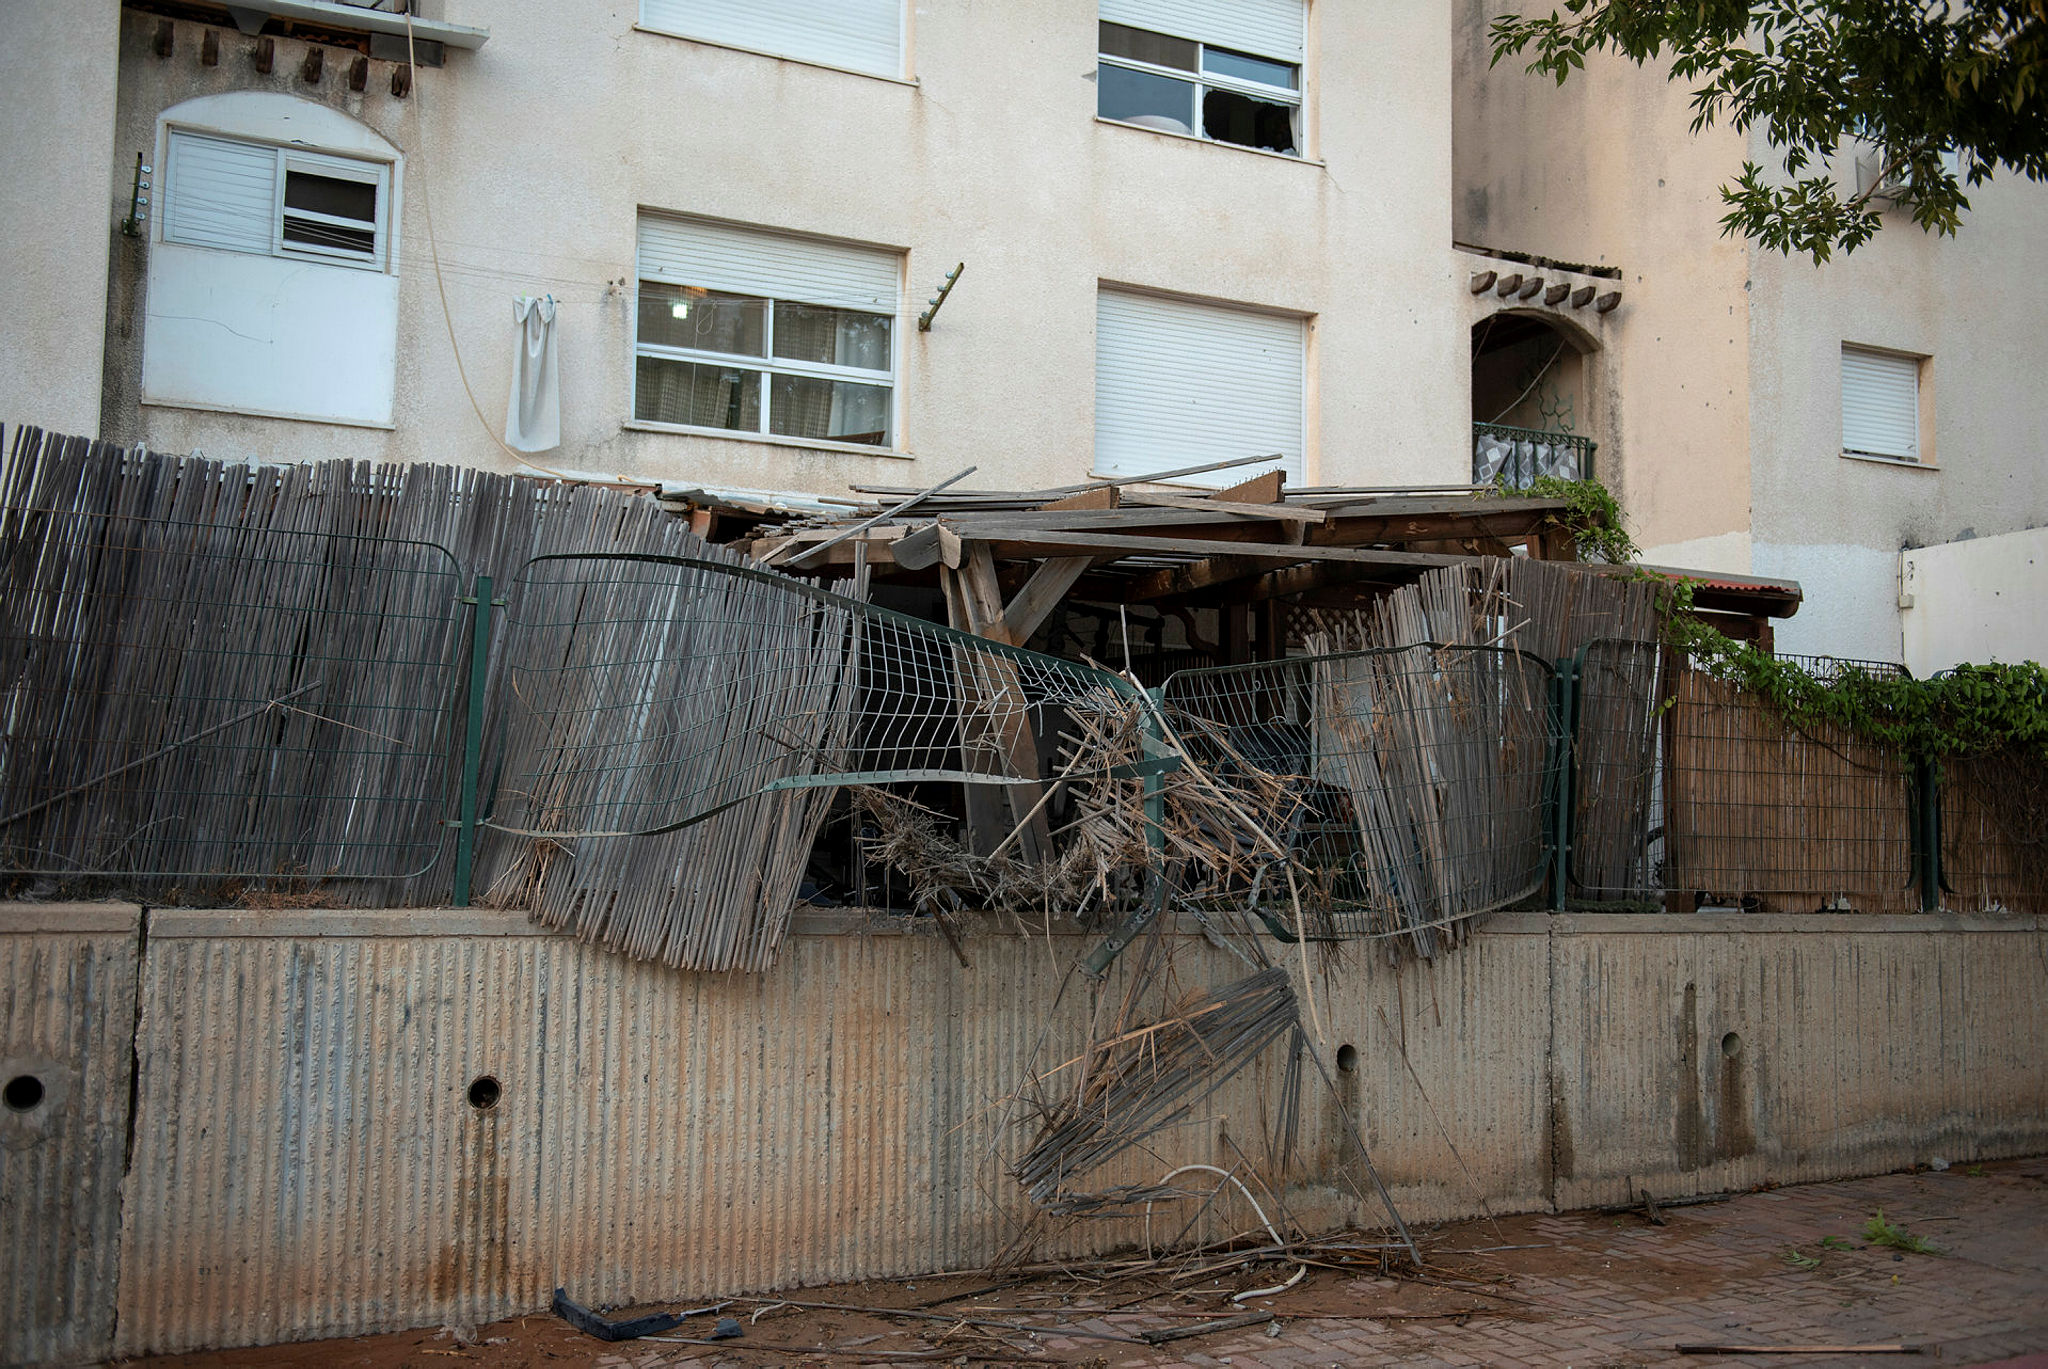 Rocket launched from Gaza hits family home in Sderot